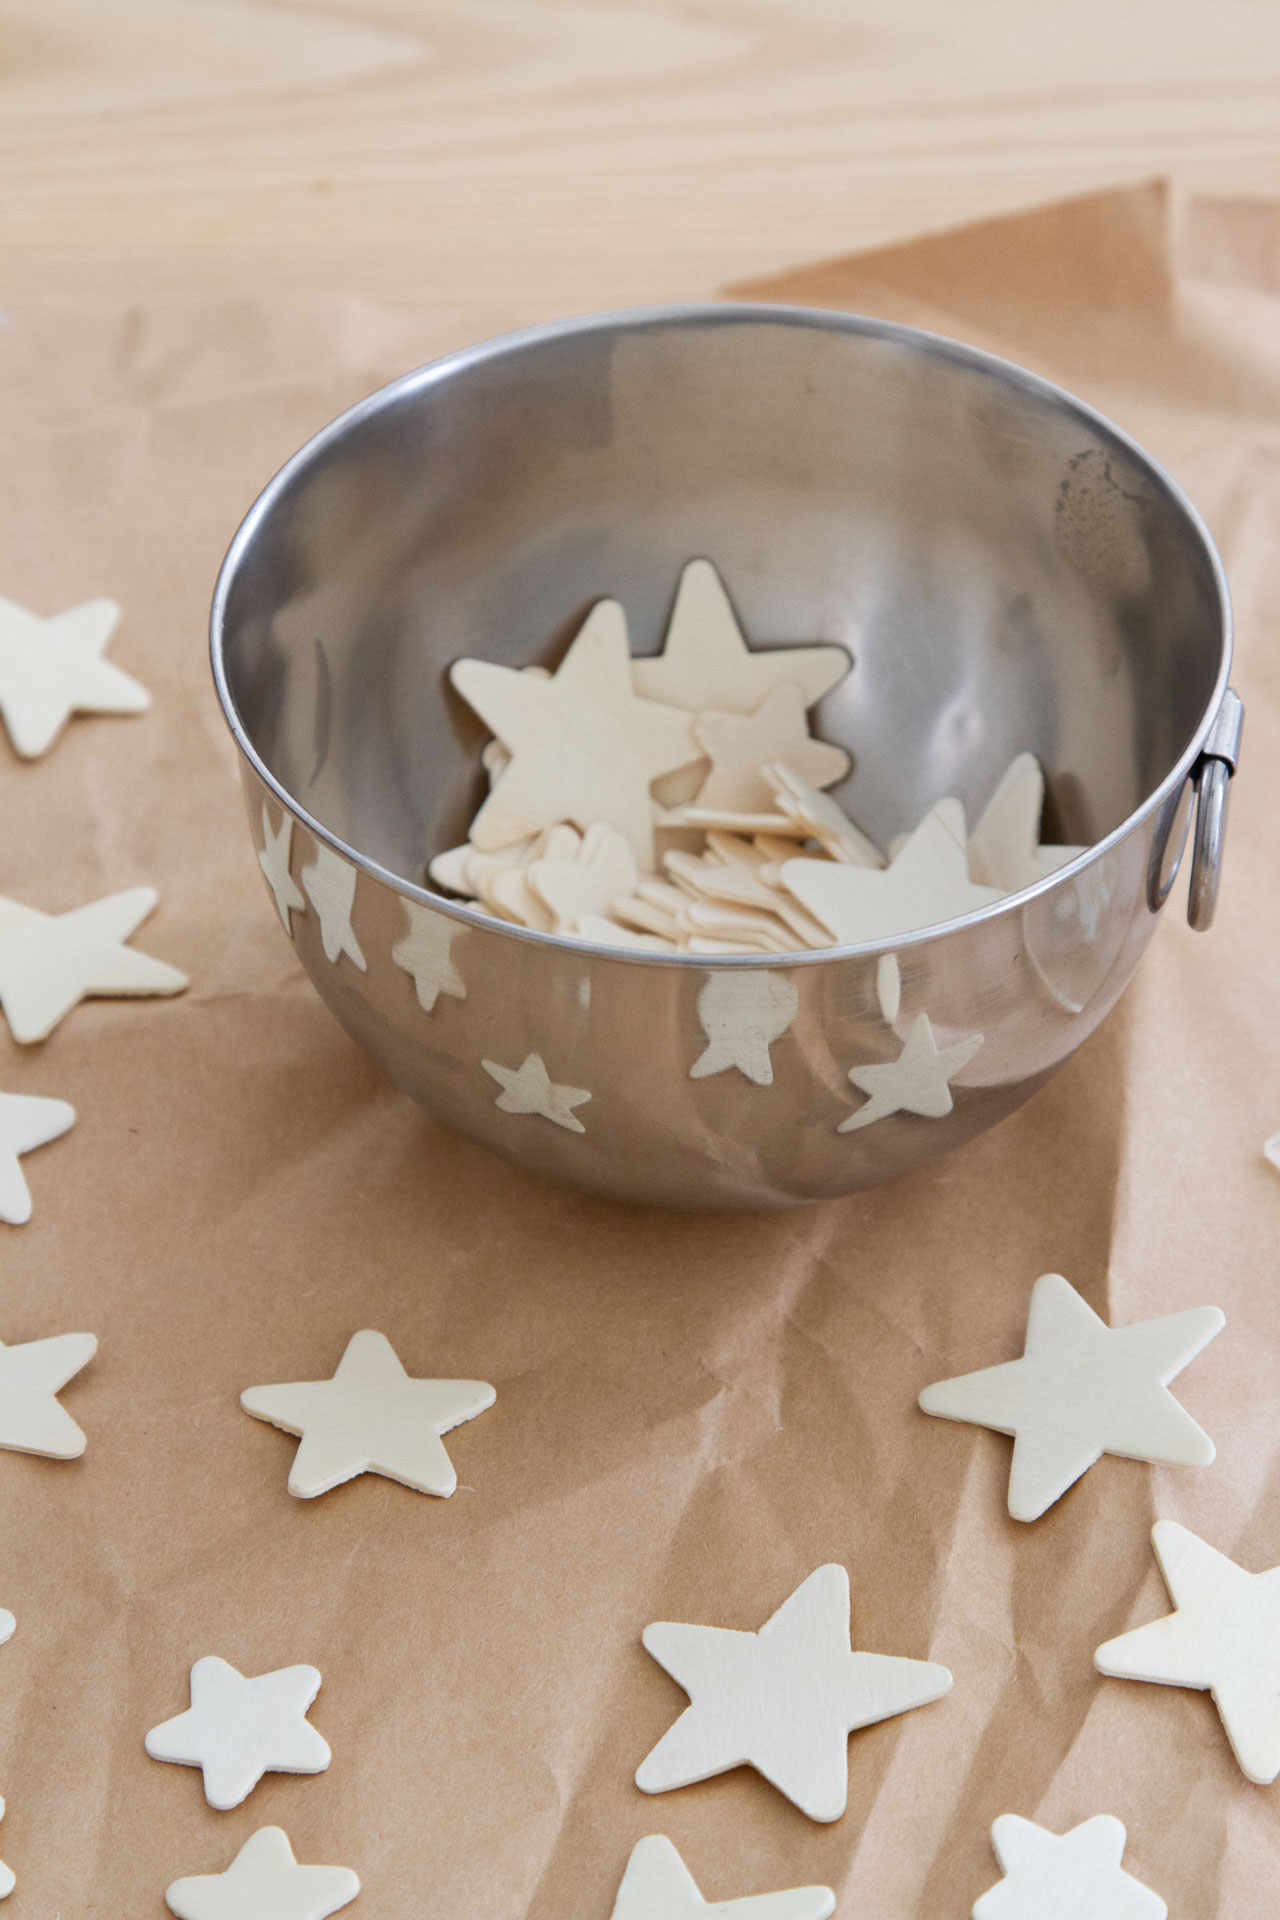 make your own: glow-in-the-dark stars. – Reading My Tea Leaves